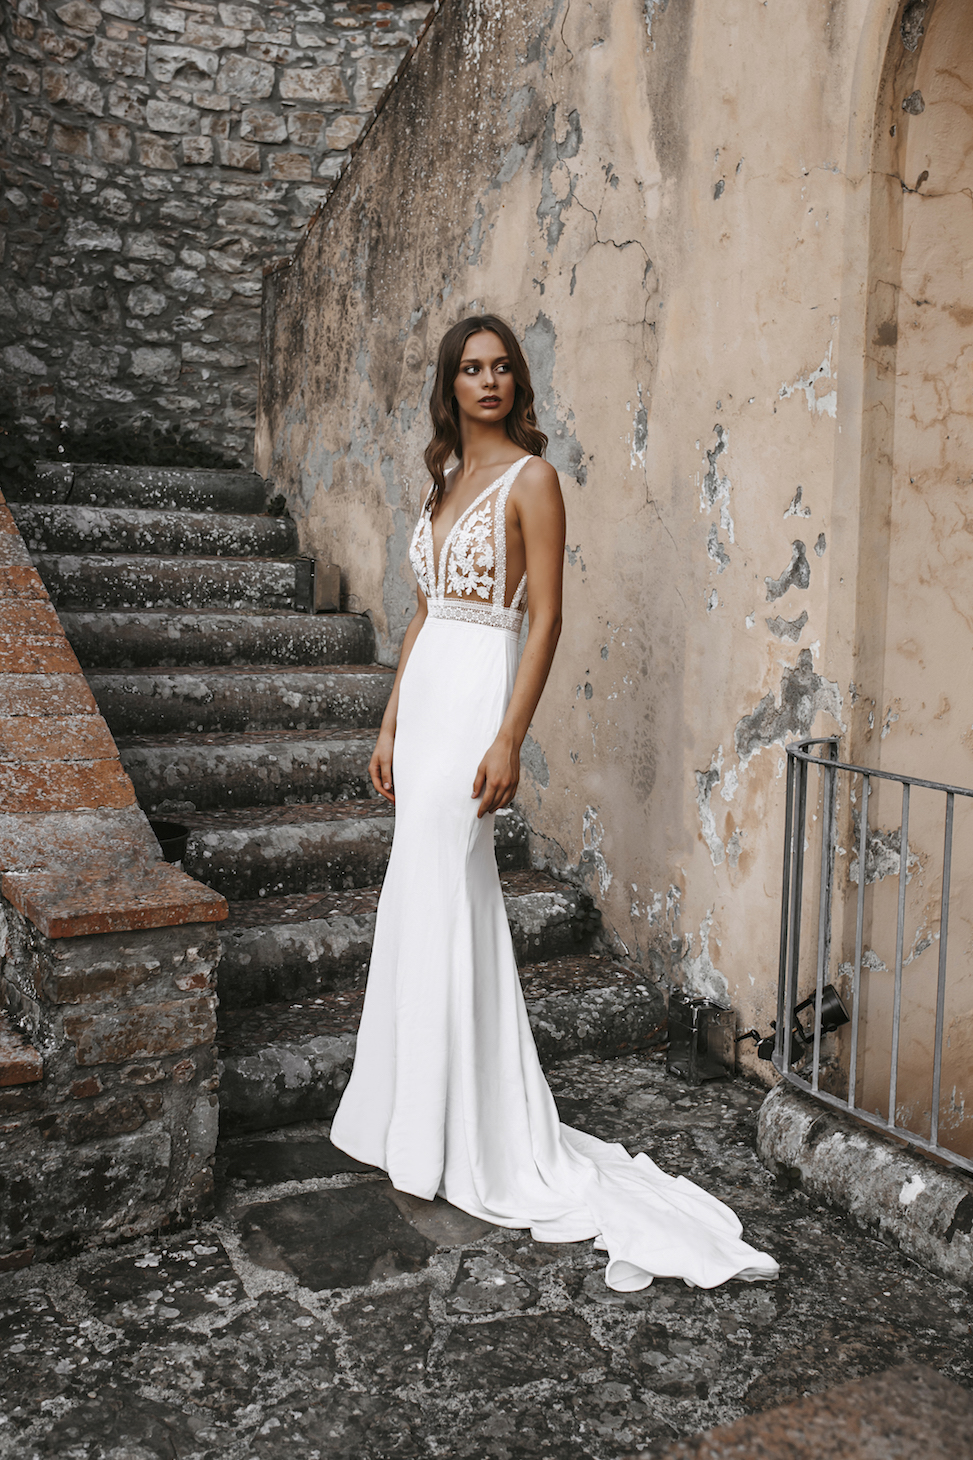 Woman standing in front of run down stone stairs in white wedding dress with sheer and floral top